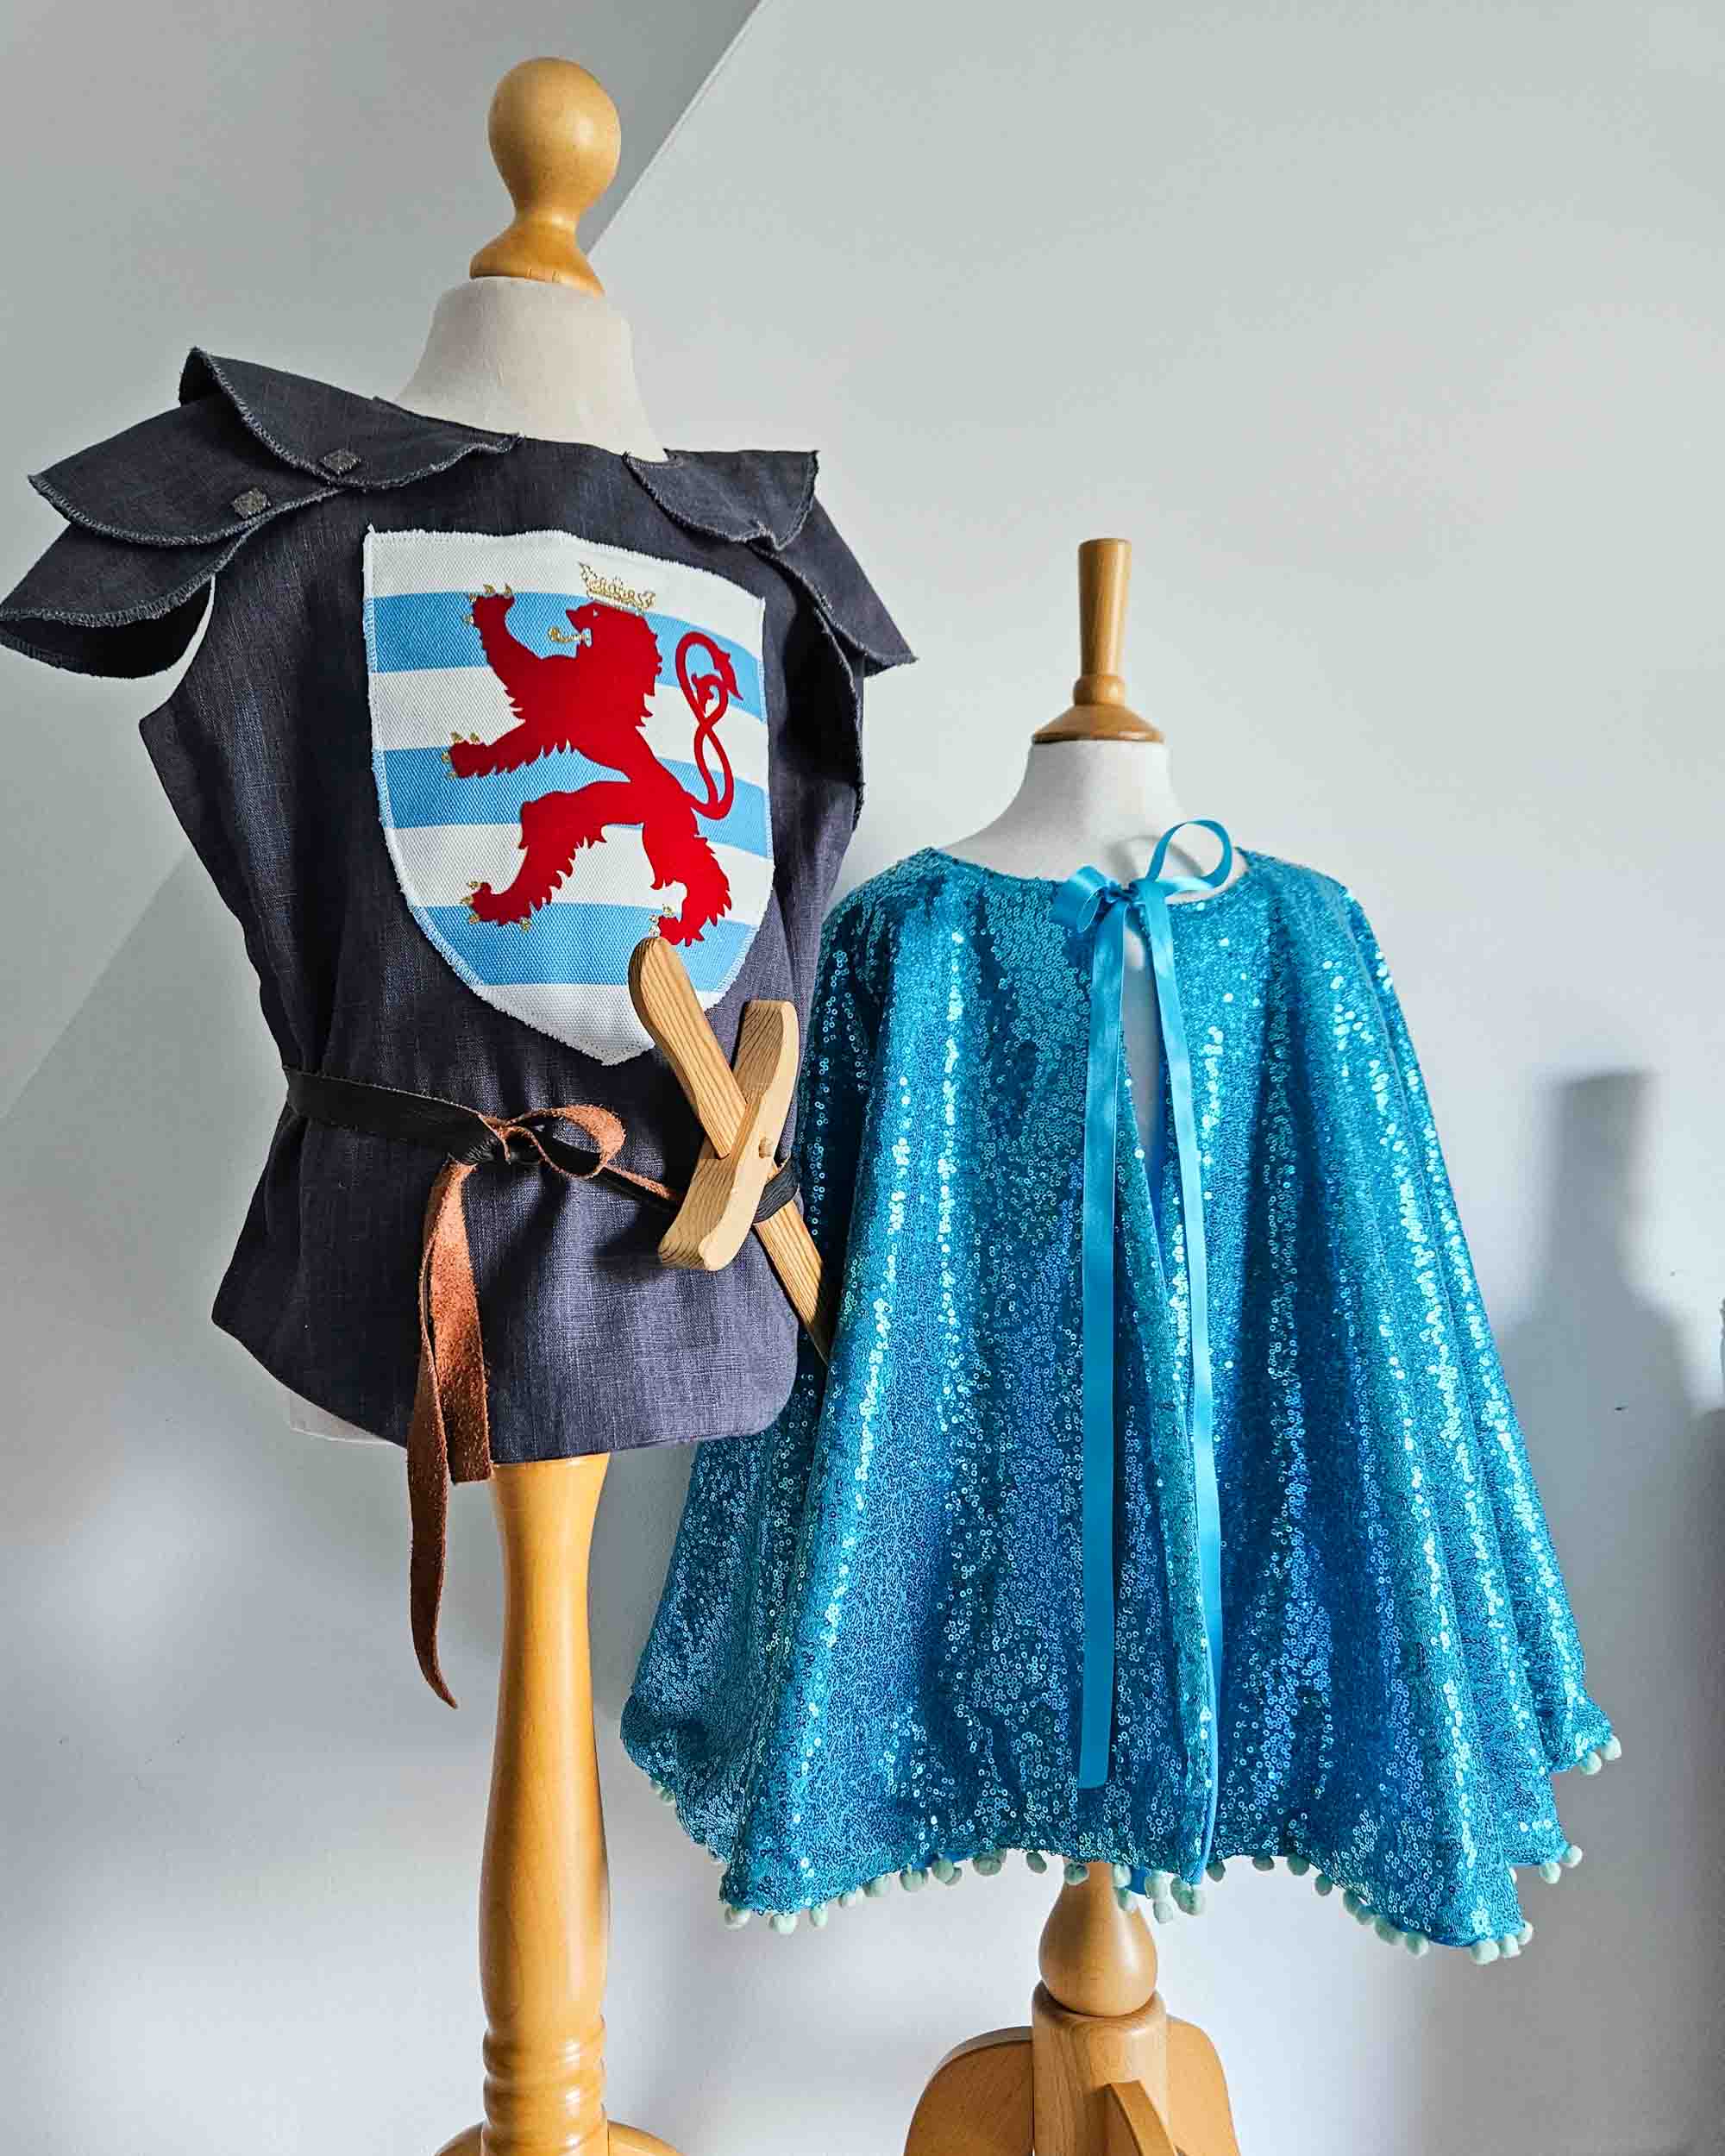 Siegfried and Melusina Luxembourg legend knights tunic and mermaid cape by Atelier Spatz